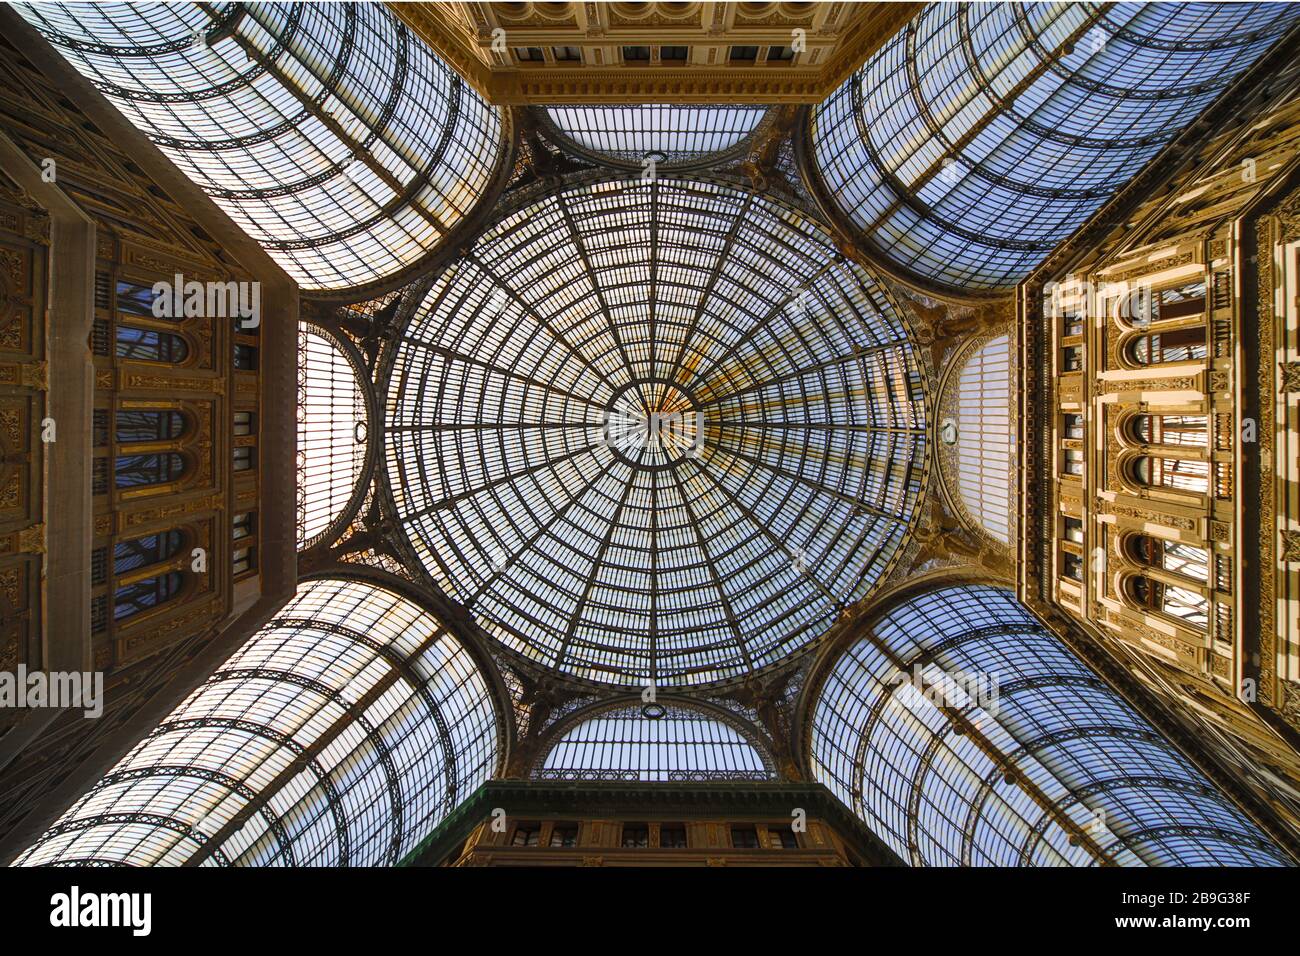 Lookin up at the Roof Symmetry at Galleria Umberto in Naples, Italy Stock Photo